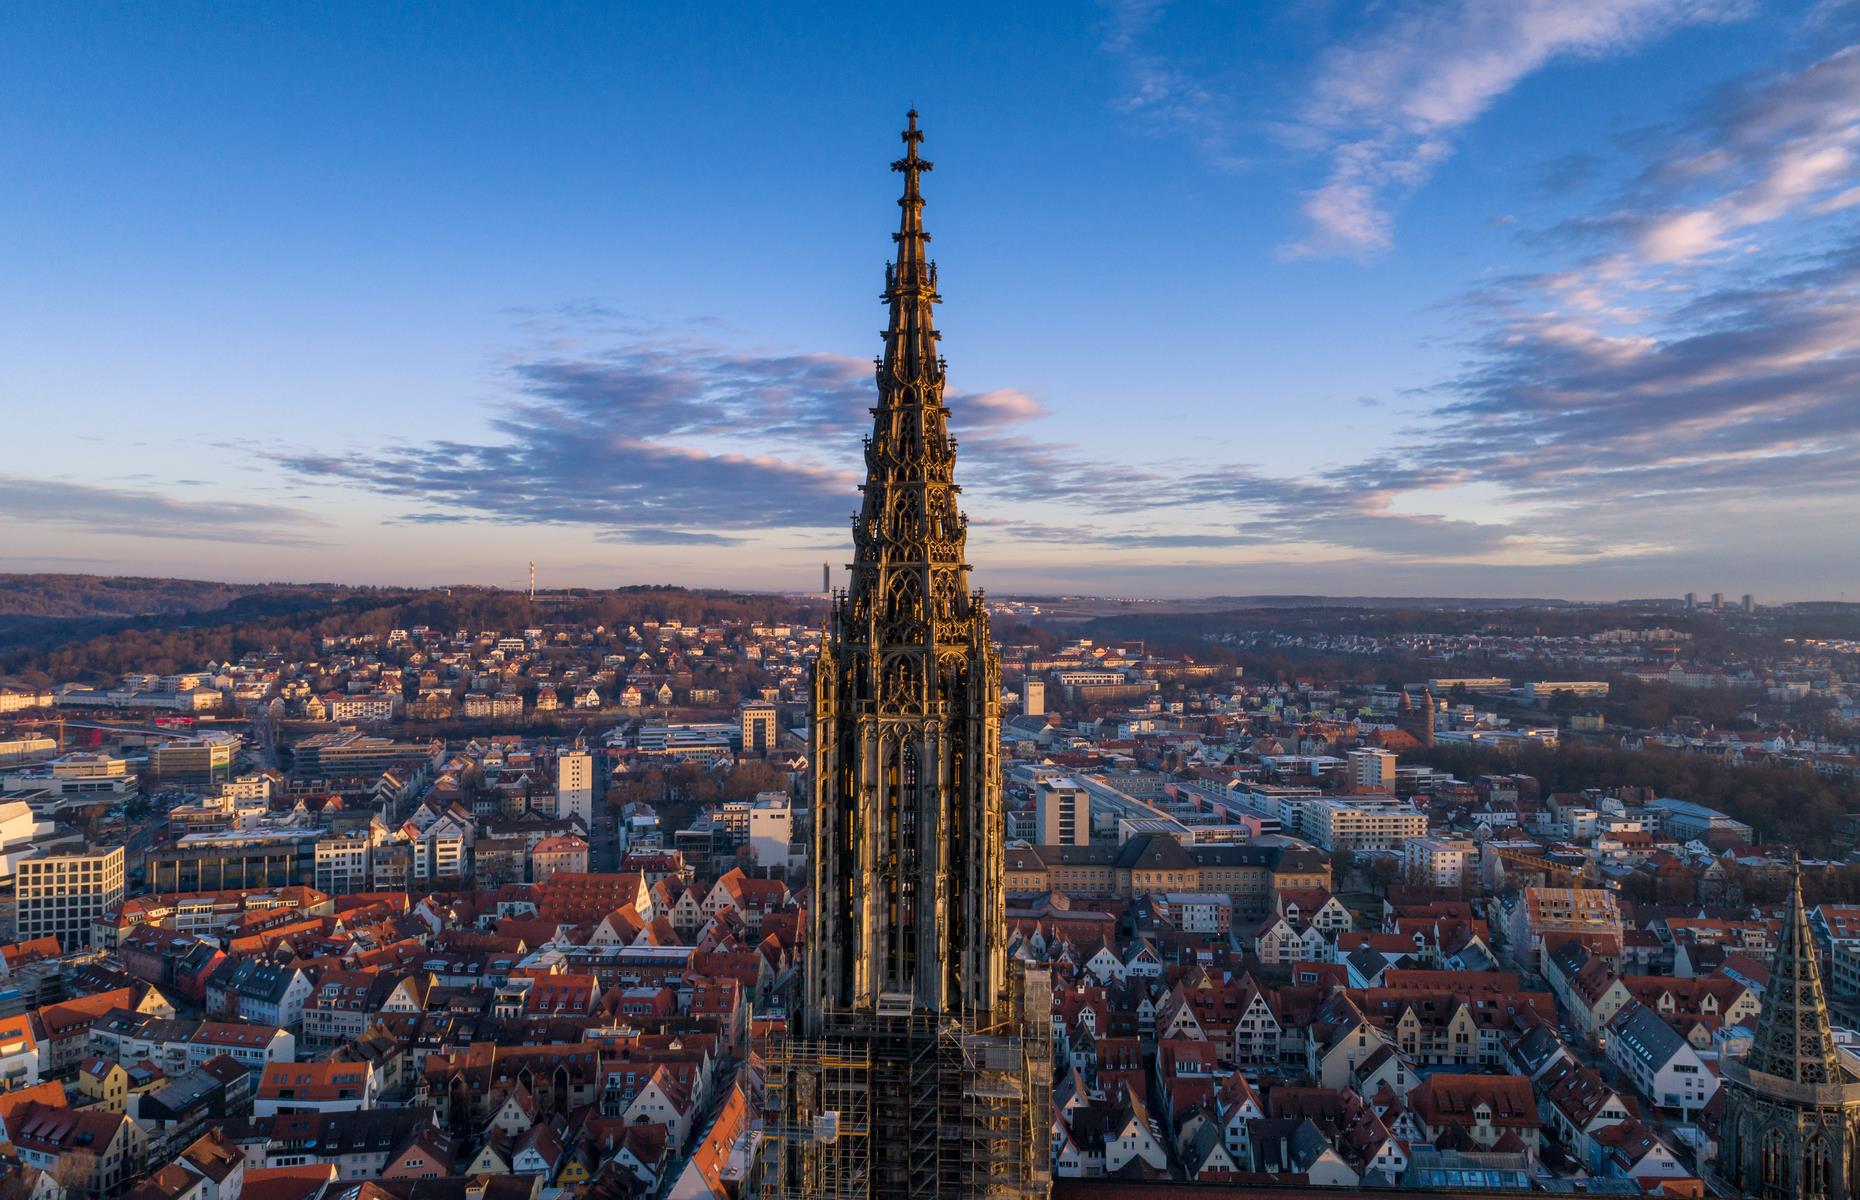 <p>Rising 530 feet (161.5m) above Ulm, a historic city in Baden-Württemberg, the <a href="https://www.ulmer-muenster.de/">Ulm Minster</a> has the highest church spire in the world. The church’s first foundation stone was laid in 1377, but it wasn’t completed until 1890 when the main steeple was finally finished. It’s usually possible to clamber up the huge Gothic structure’s 768 steps to reach its observation platform and absorb the dizzying views.</p>  <p><strong><a href="https://www.loveexploring.com/galleries/89604/the-worlds-beautiful-cathedrals-you-should-visit-once-in-your-lifetime">Discover the world's most stunning cathedrals</a></strong></p>